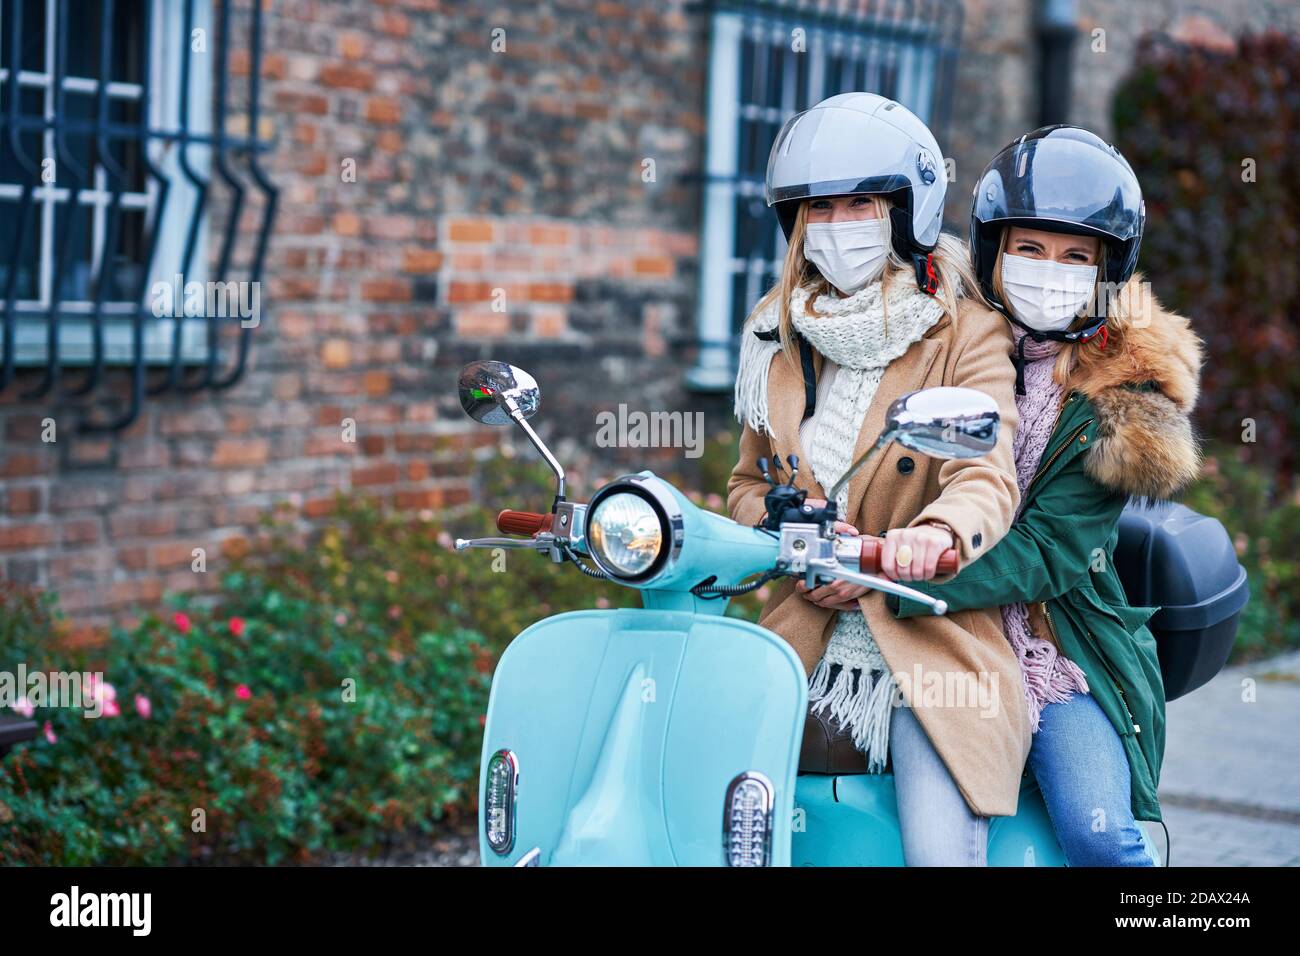 Two women wearing masks and commuting on scooter Stock Photo